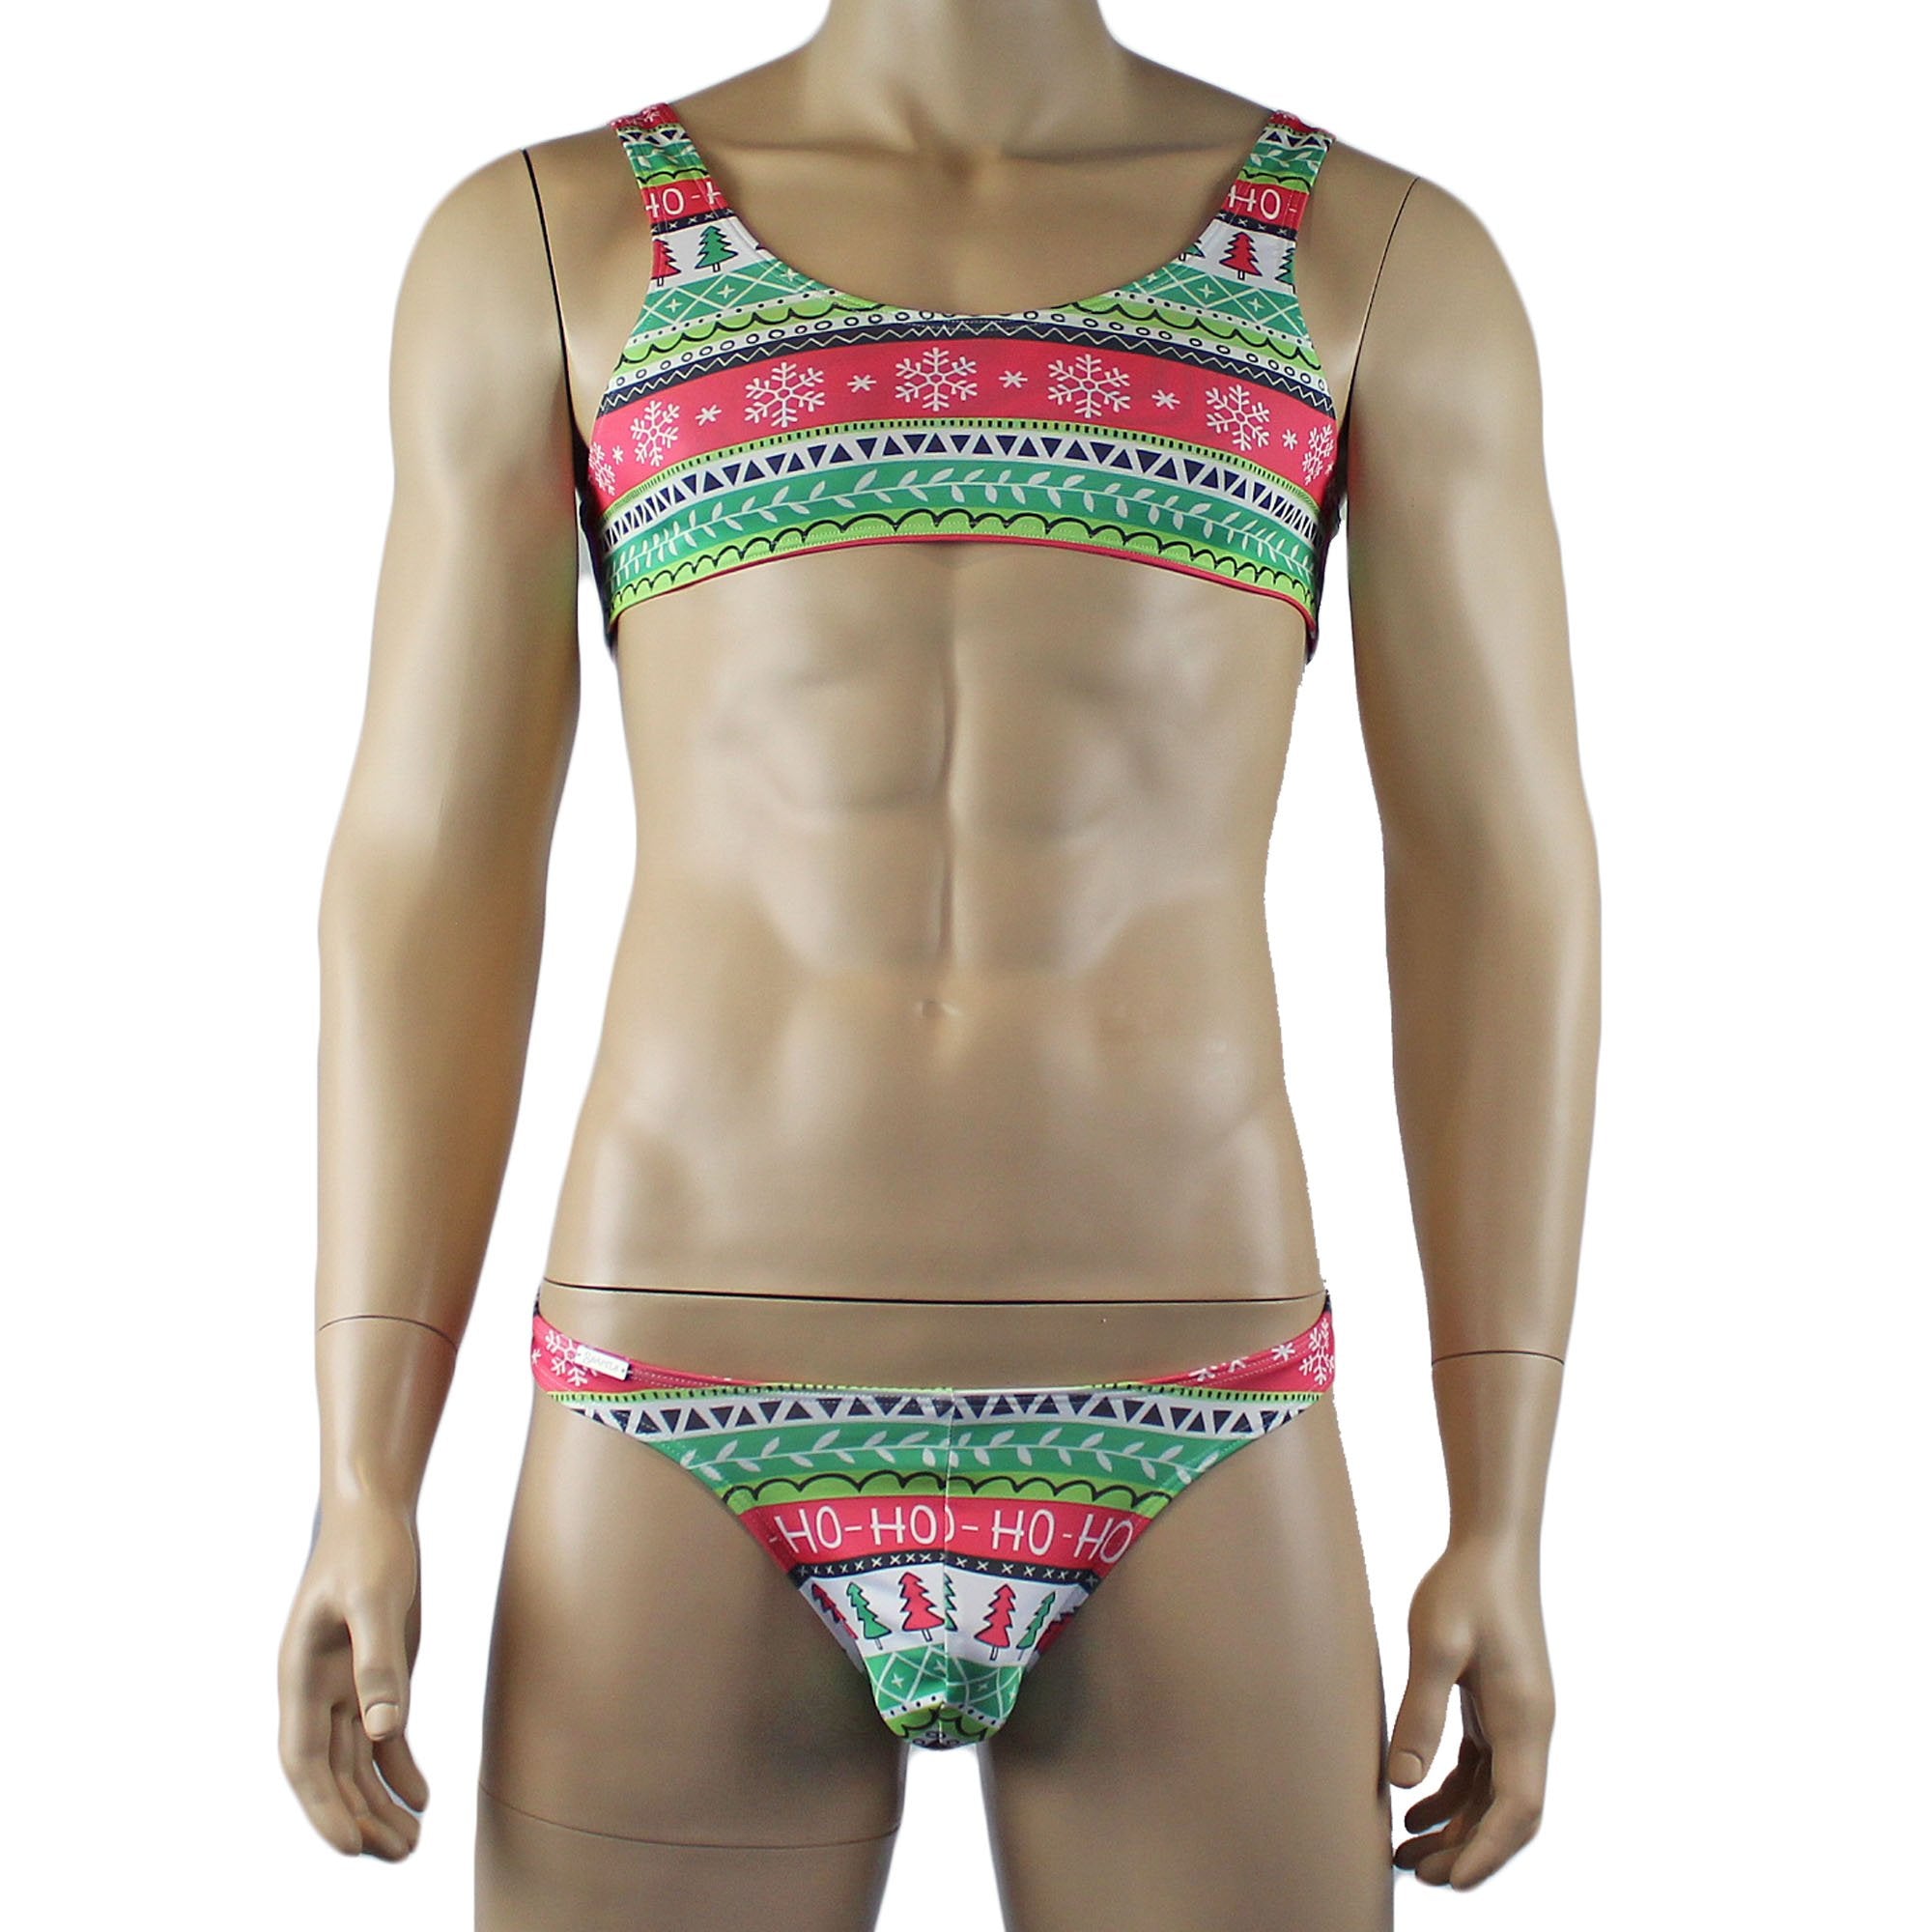 Bring in the Cheer for Australia Day in these Spangla Mens Underwear S